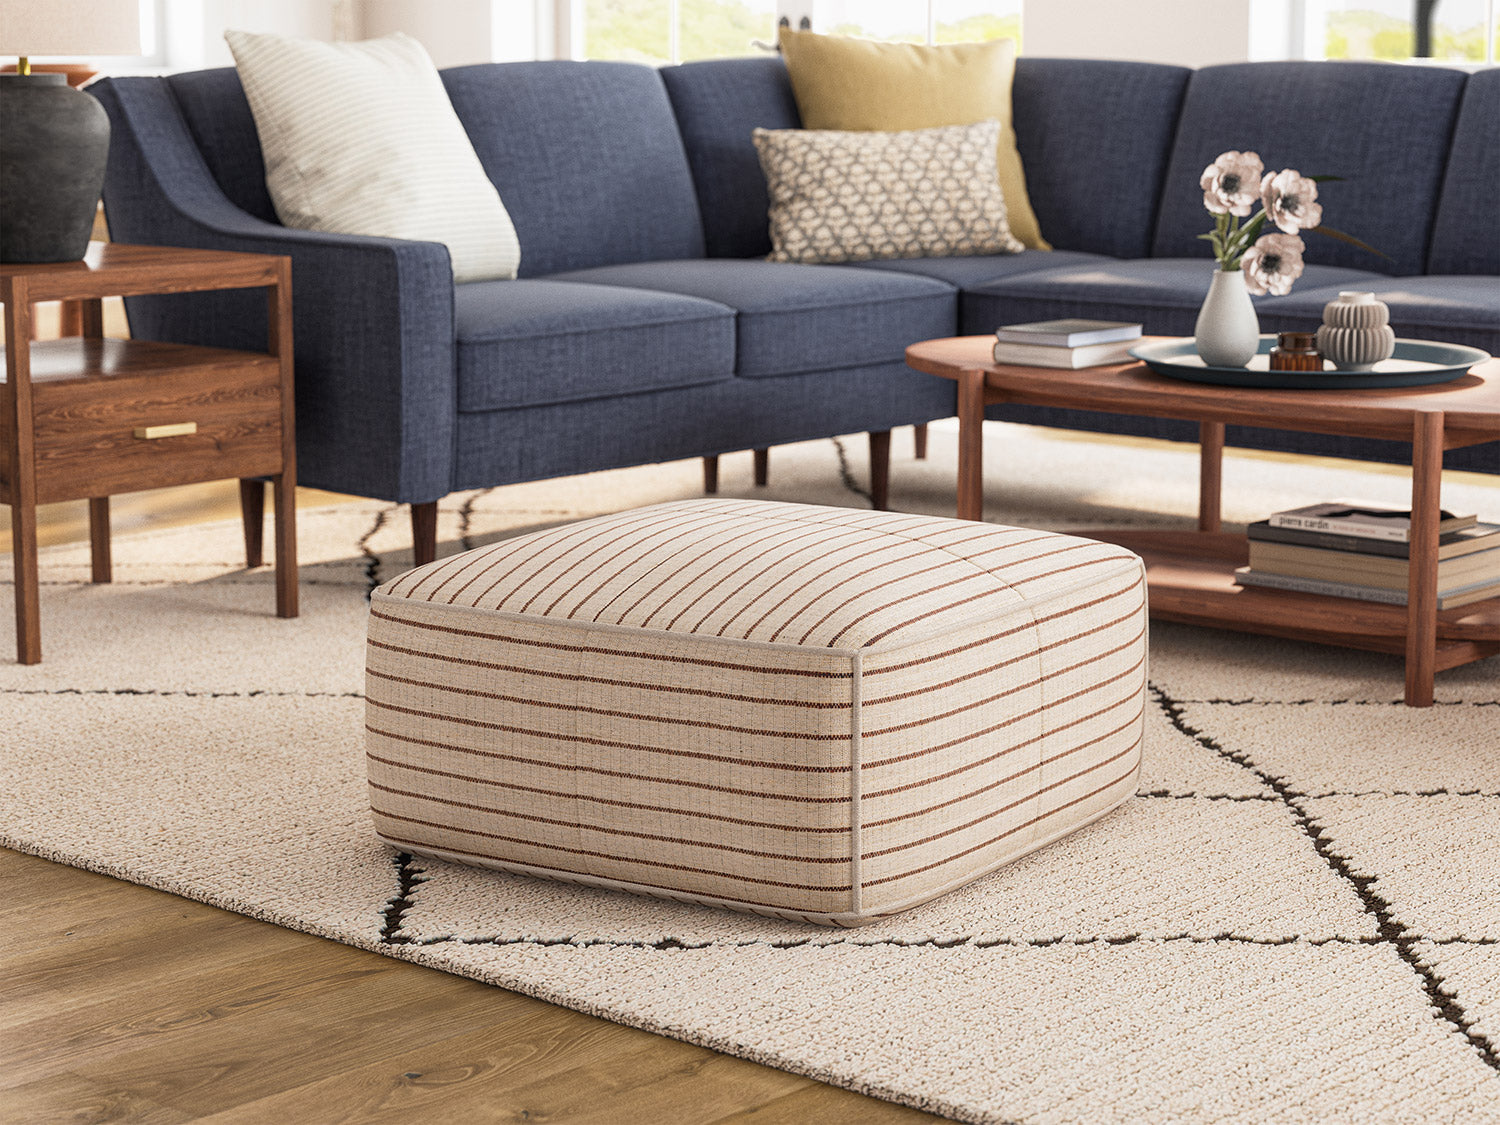 IRL: Mosh Ottoman in Sirsi fabric with the Zavis Corner Sectional in Smart Navy fabric